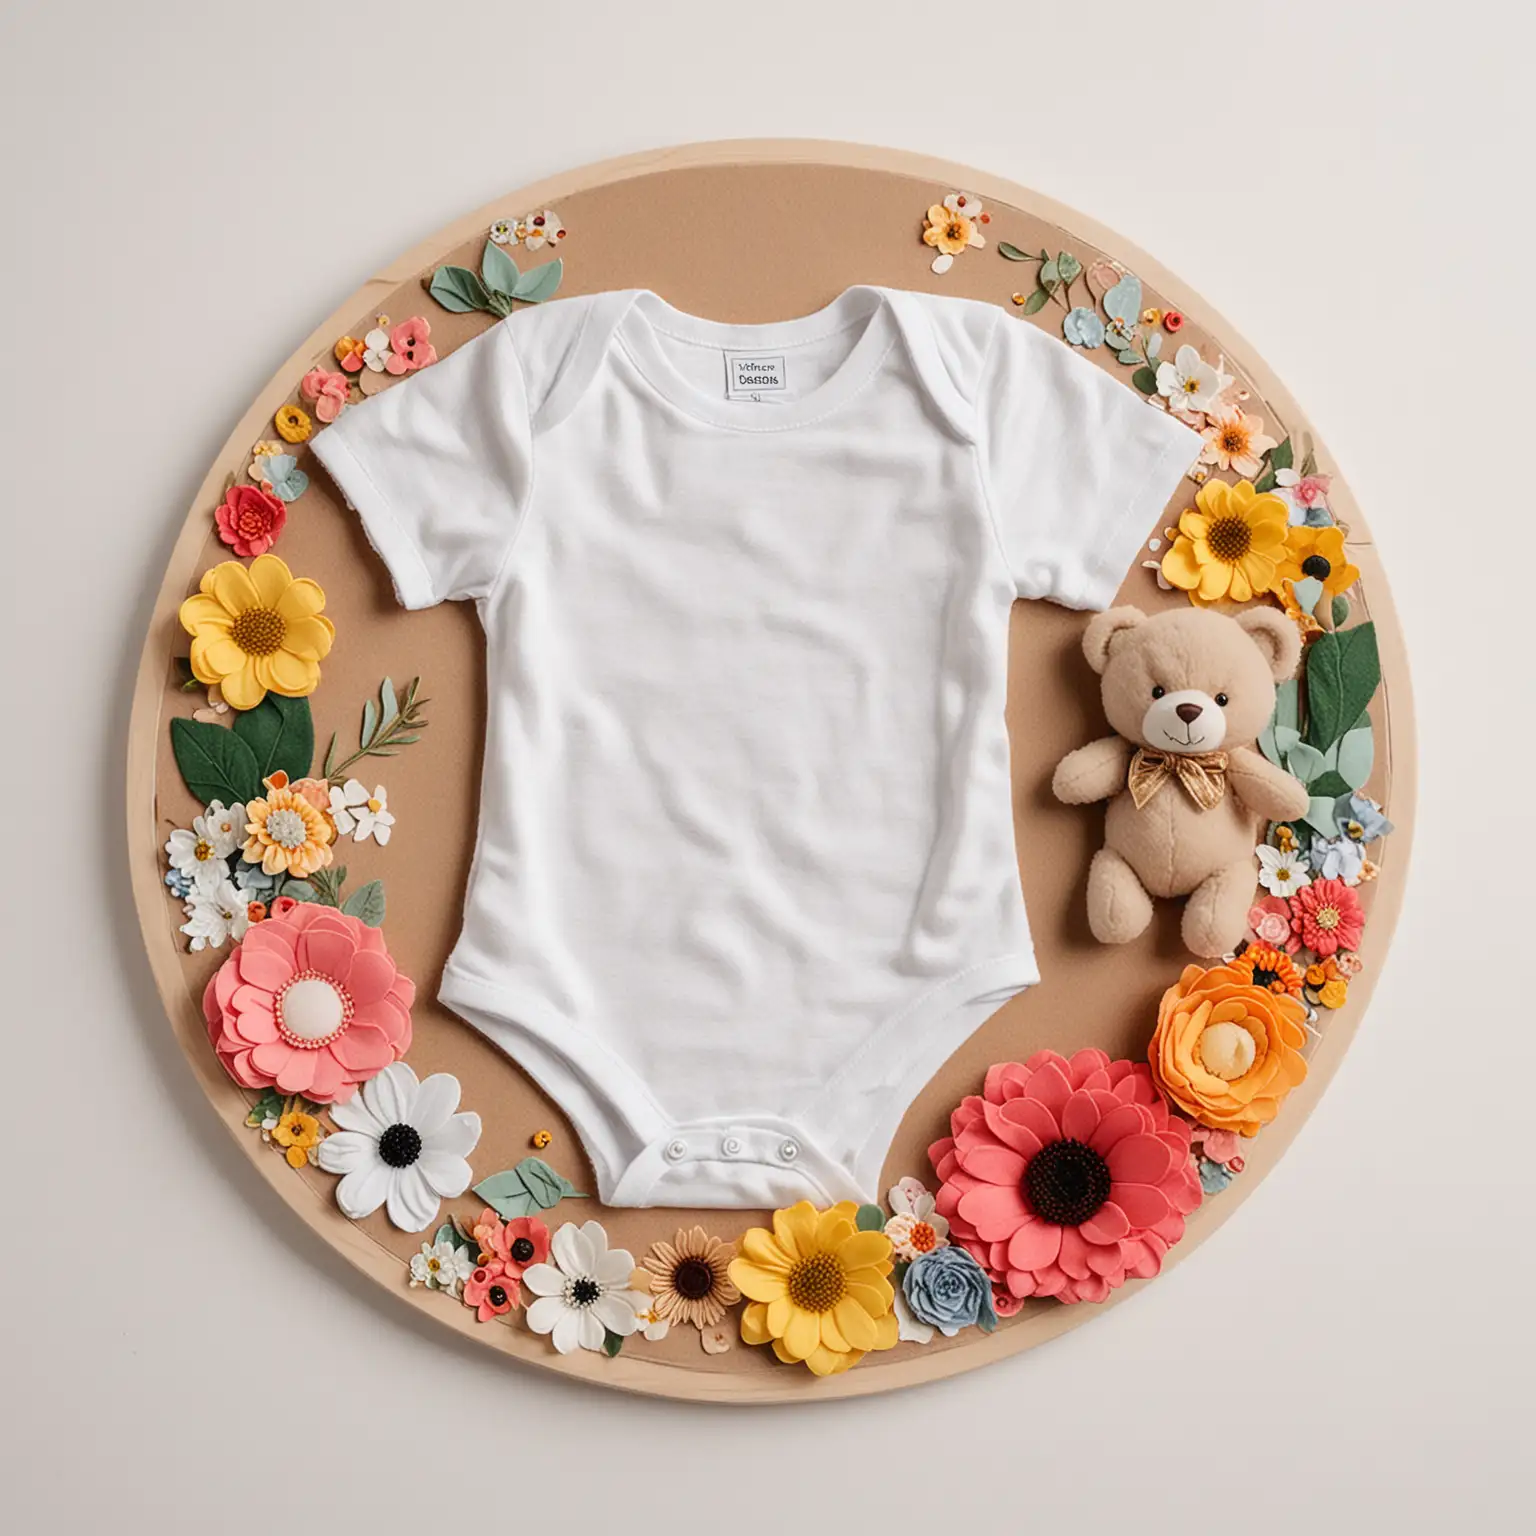 Flat lay image of a baby onesie with a round felt board, decorative flowers, a teddy bear, suitable for baby announcement, white background, 
aesthetically pleasing